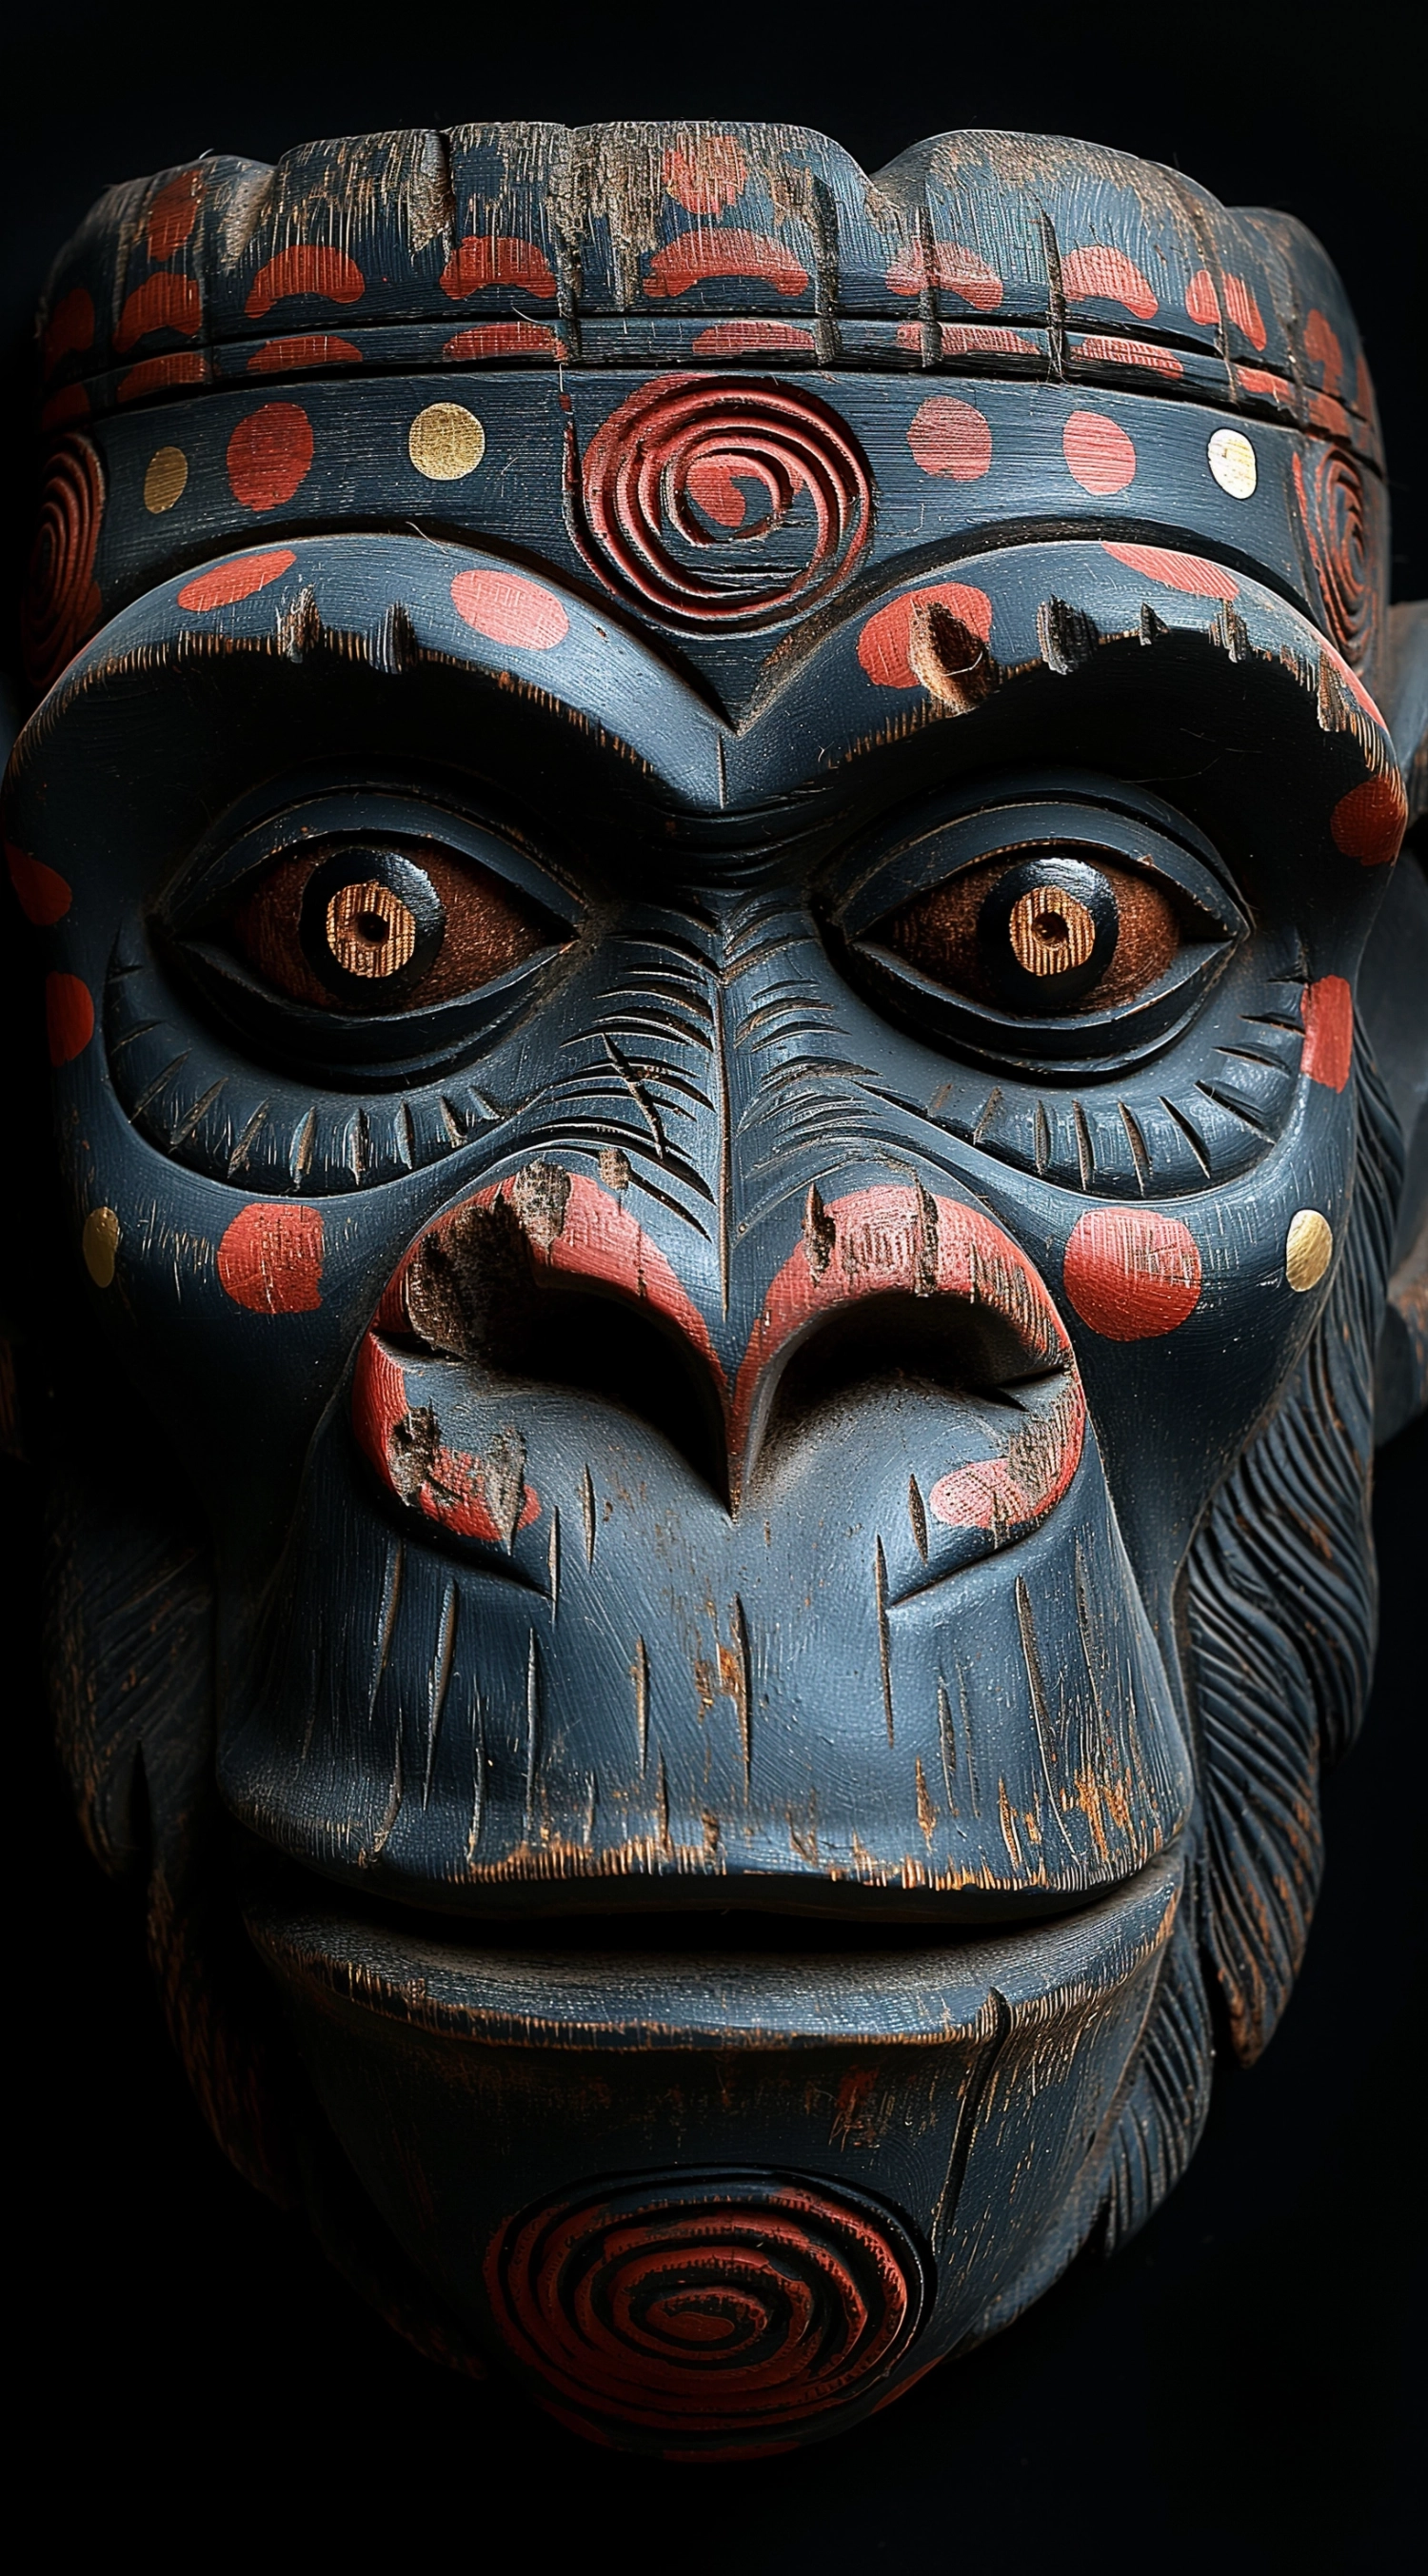 black background, top view of an angry monkey mask made from dark wood with painted eyes and mouth open holding out its hand to you. the wooden carved features on it have been decorated in patterns by native art carving artistes, using red dots for lips, white stripes as eyebrows and grey or black lines for eyelashes. the overall look is eerie but also comical.